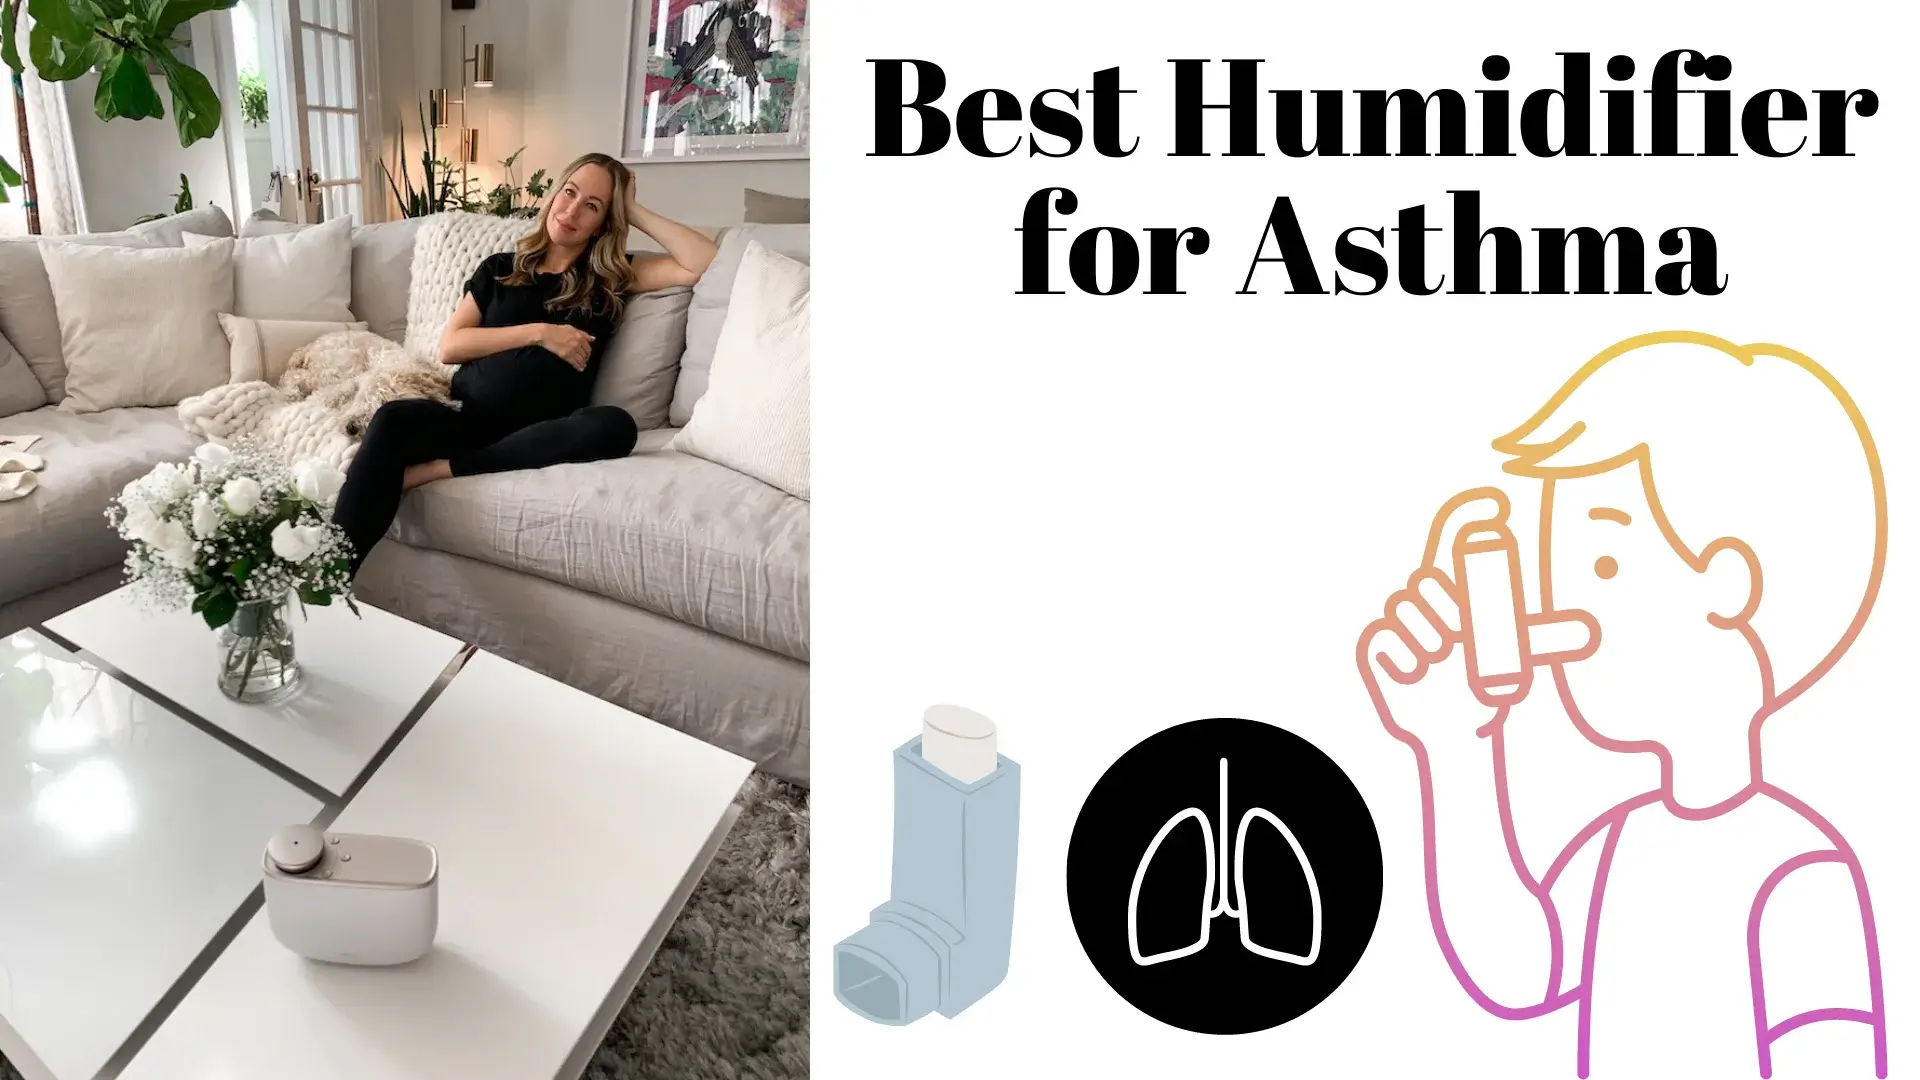 Best Humidifier for Asthma